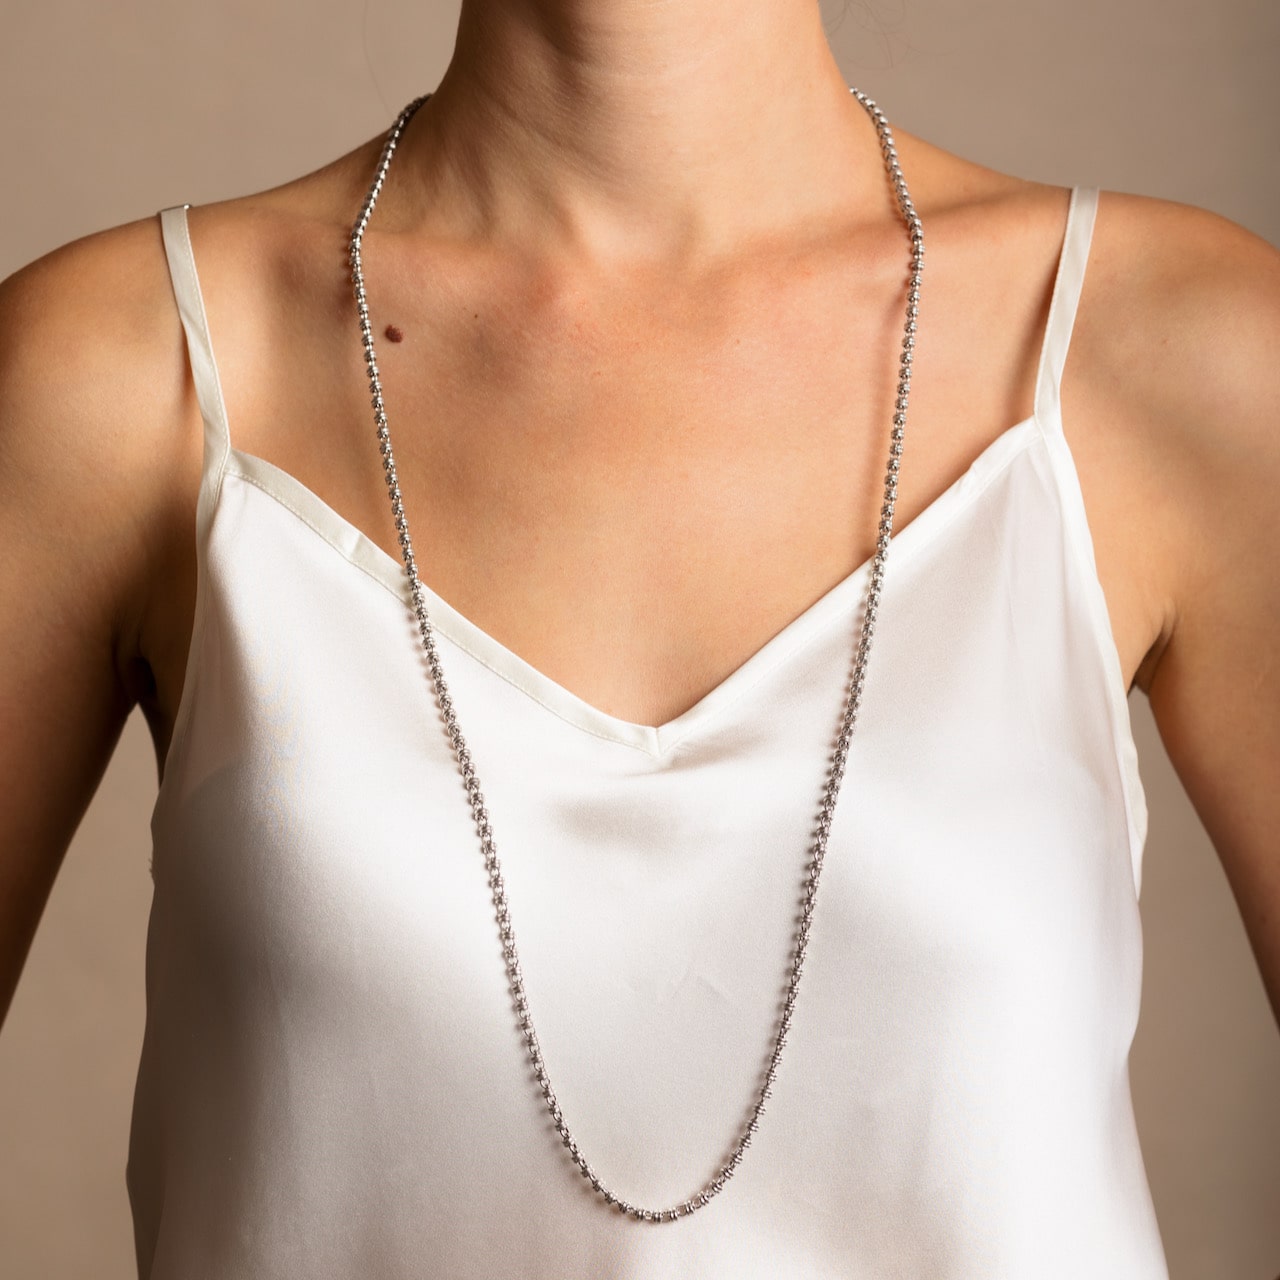 A model wearing a long (34-inch) DelBrenna Iconic Links 3mm silver necklace with matching Links 3mm silver earrings in the same chain design. Both pieces of hand-crafted Italian jewelry are made by DelBrenna Italian Jewelers in Tuscany. 